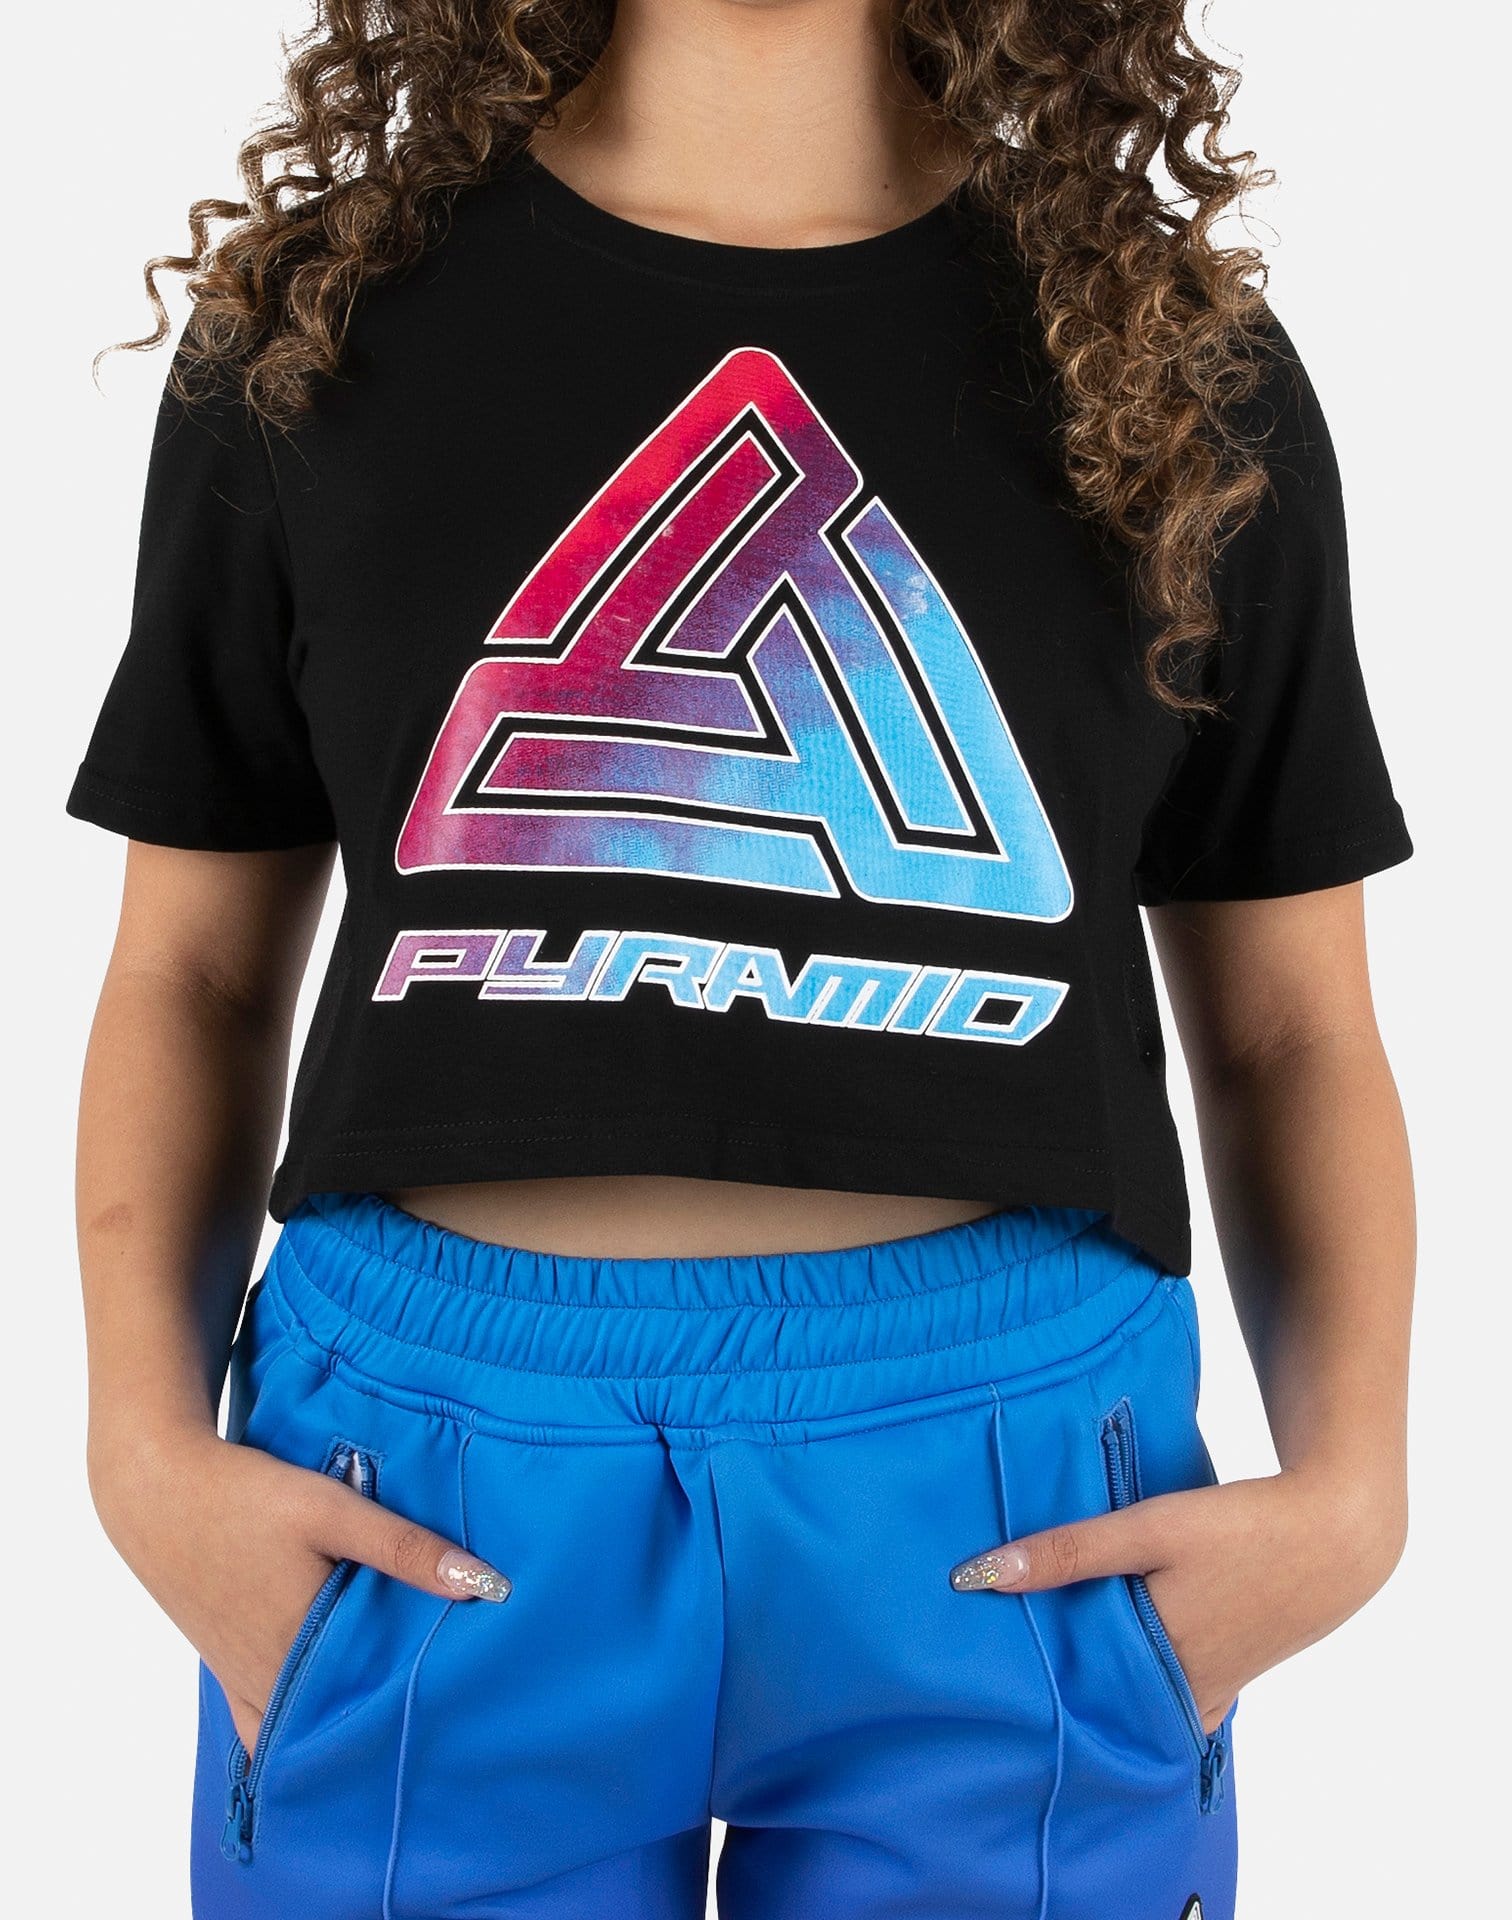 Black Pyramid Women's Ombre Logo Cropped Tee